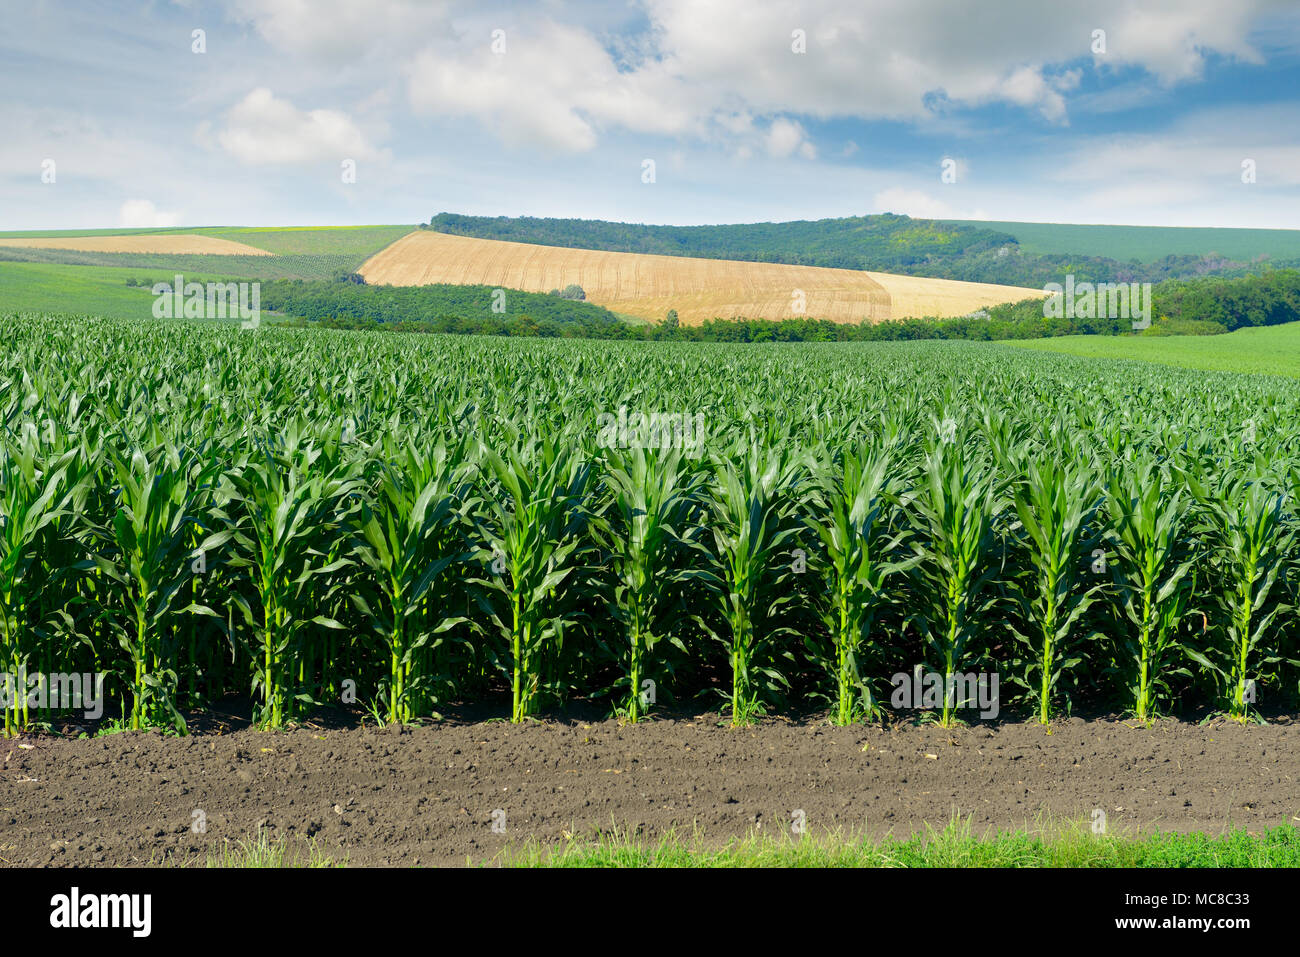 Corn field in the picturesque hills and white clouds in the sky. Stock Photo